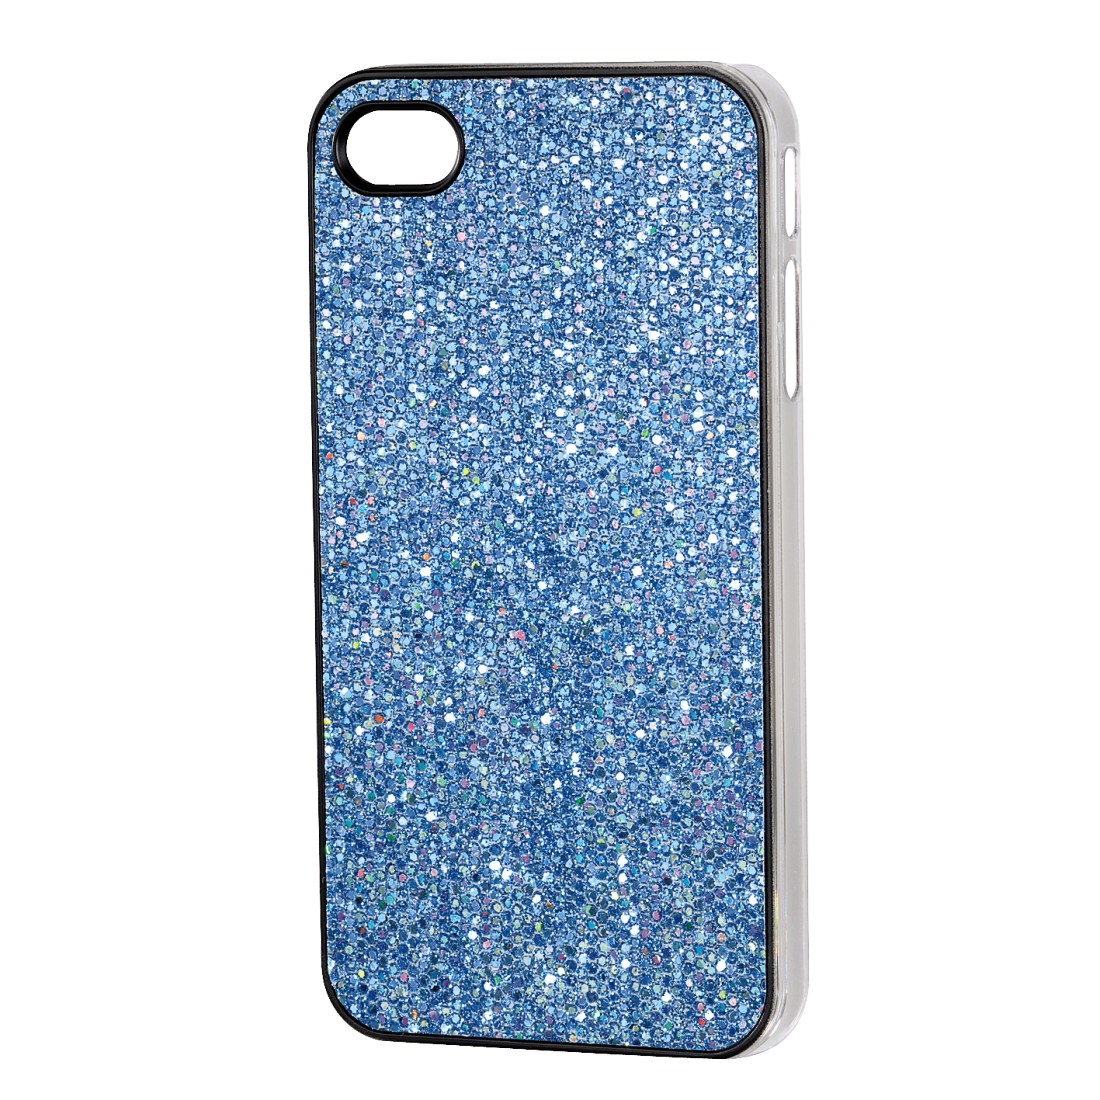 00107330 Hama "Fancy" Mobile Phone Cover for Apple iPhone 4/4S, blue |  hama.com